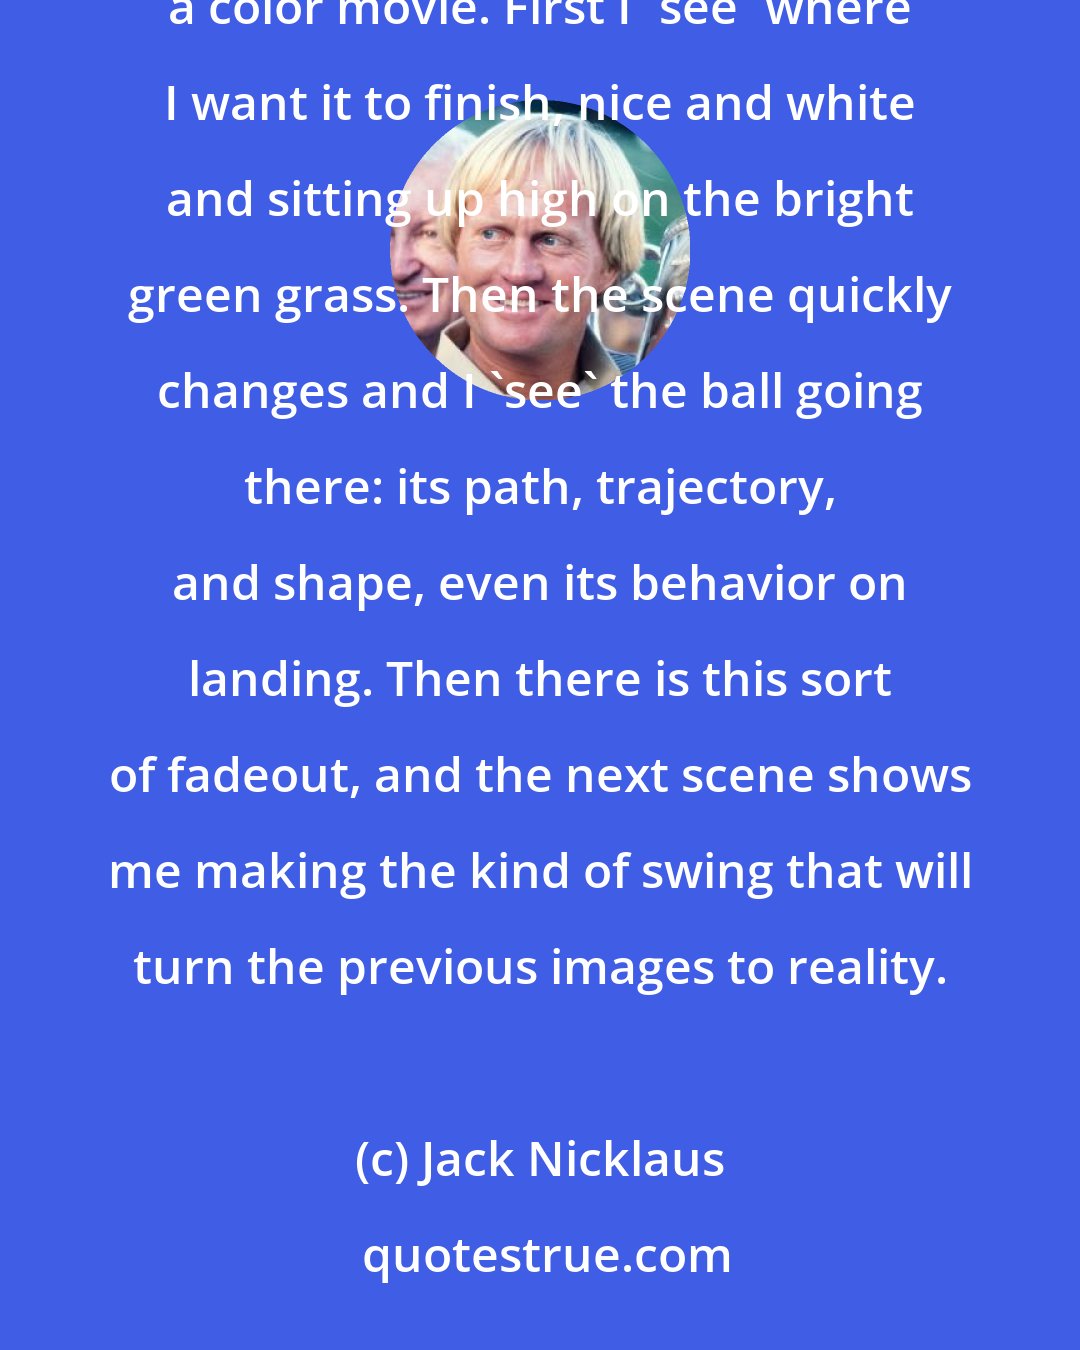 Jack Nicklaus: I never hit a shot, not even in practice, without having a very sharp, in-focus picture of it in my head. It's like a color movie. First I 'see' where I want it to finish, nice and white and sitting up high on the bright green grass. Then the scene quickly changes and I 'see' the ball going there: its path, trajectory, and shape, even its behavior on landing. Then there is this sort of fadeout, and the next scene shows me making the kind of swing that will turn the previous images to reality.